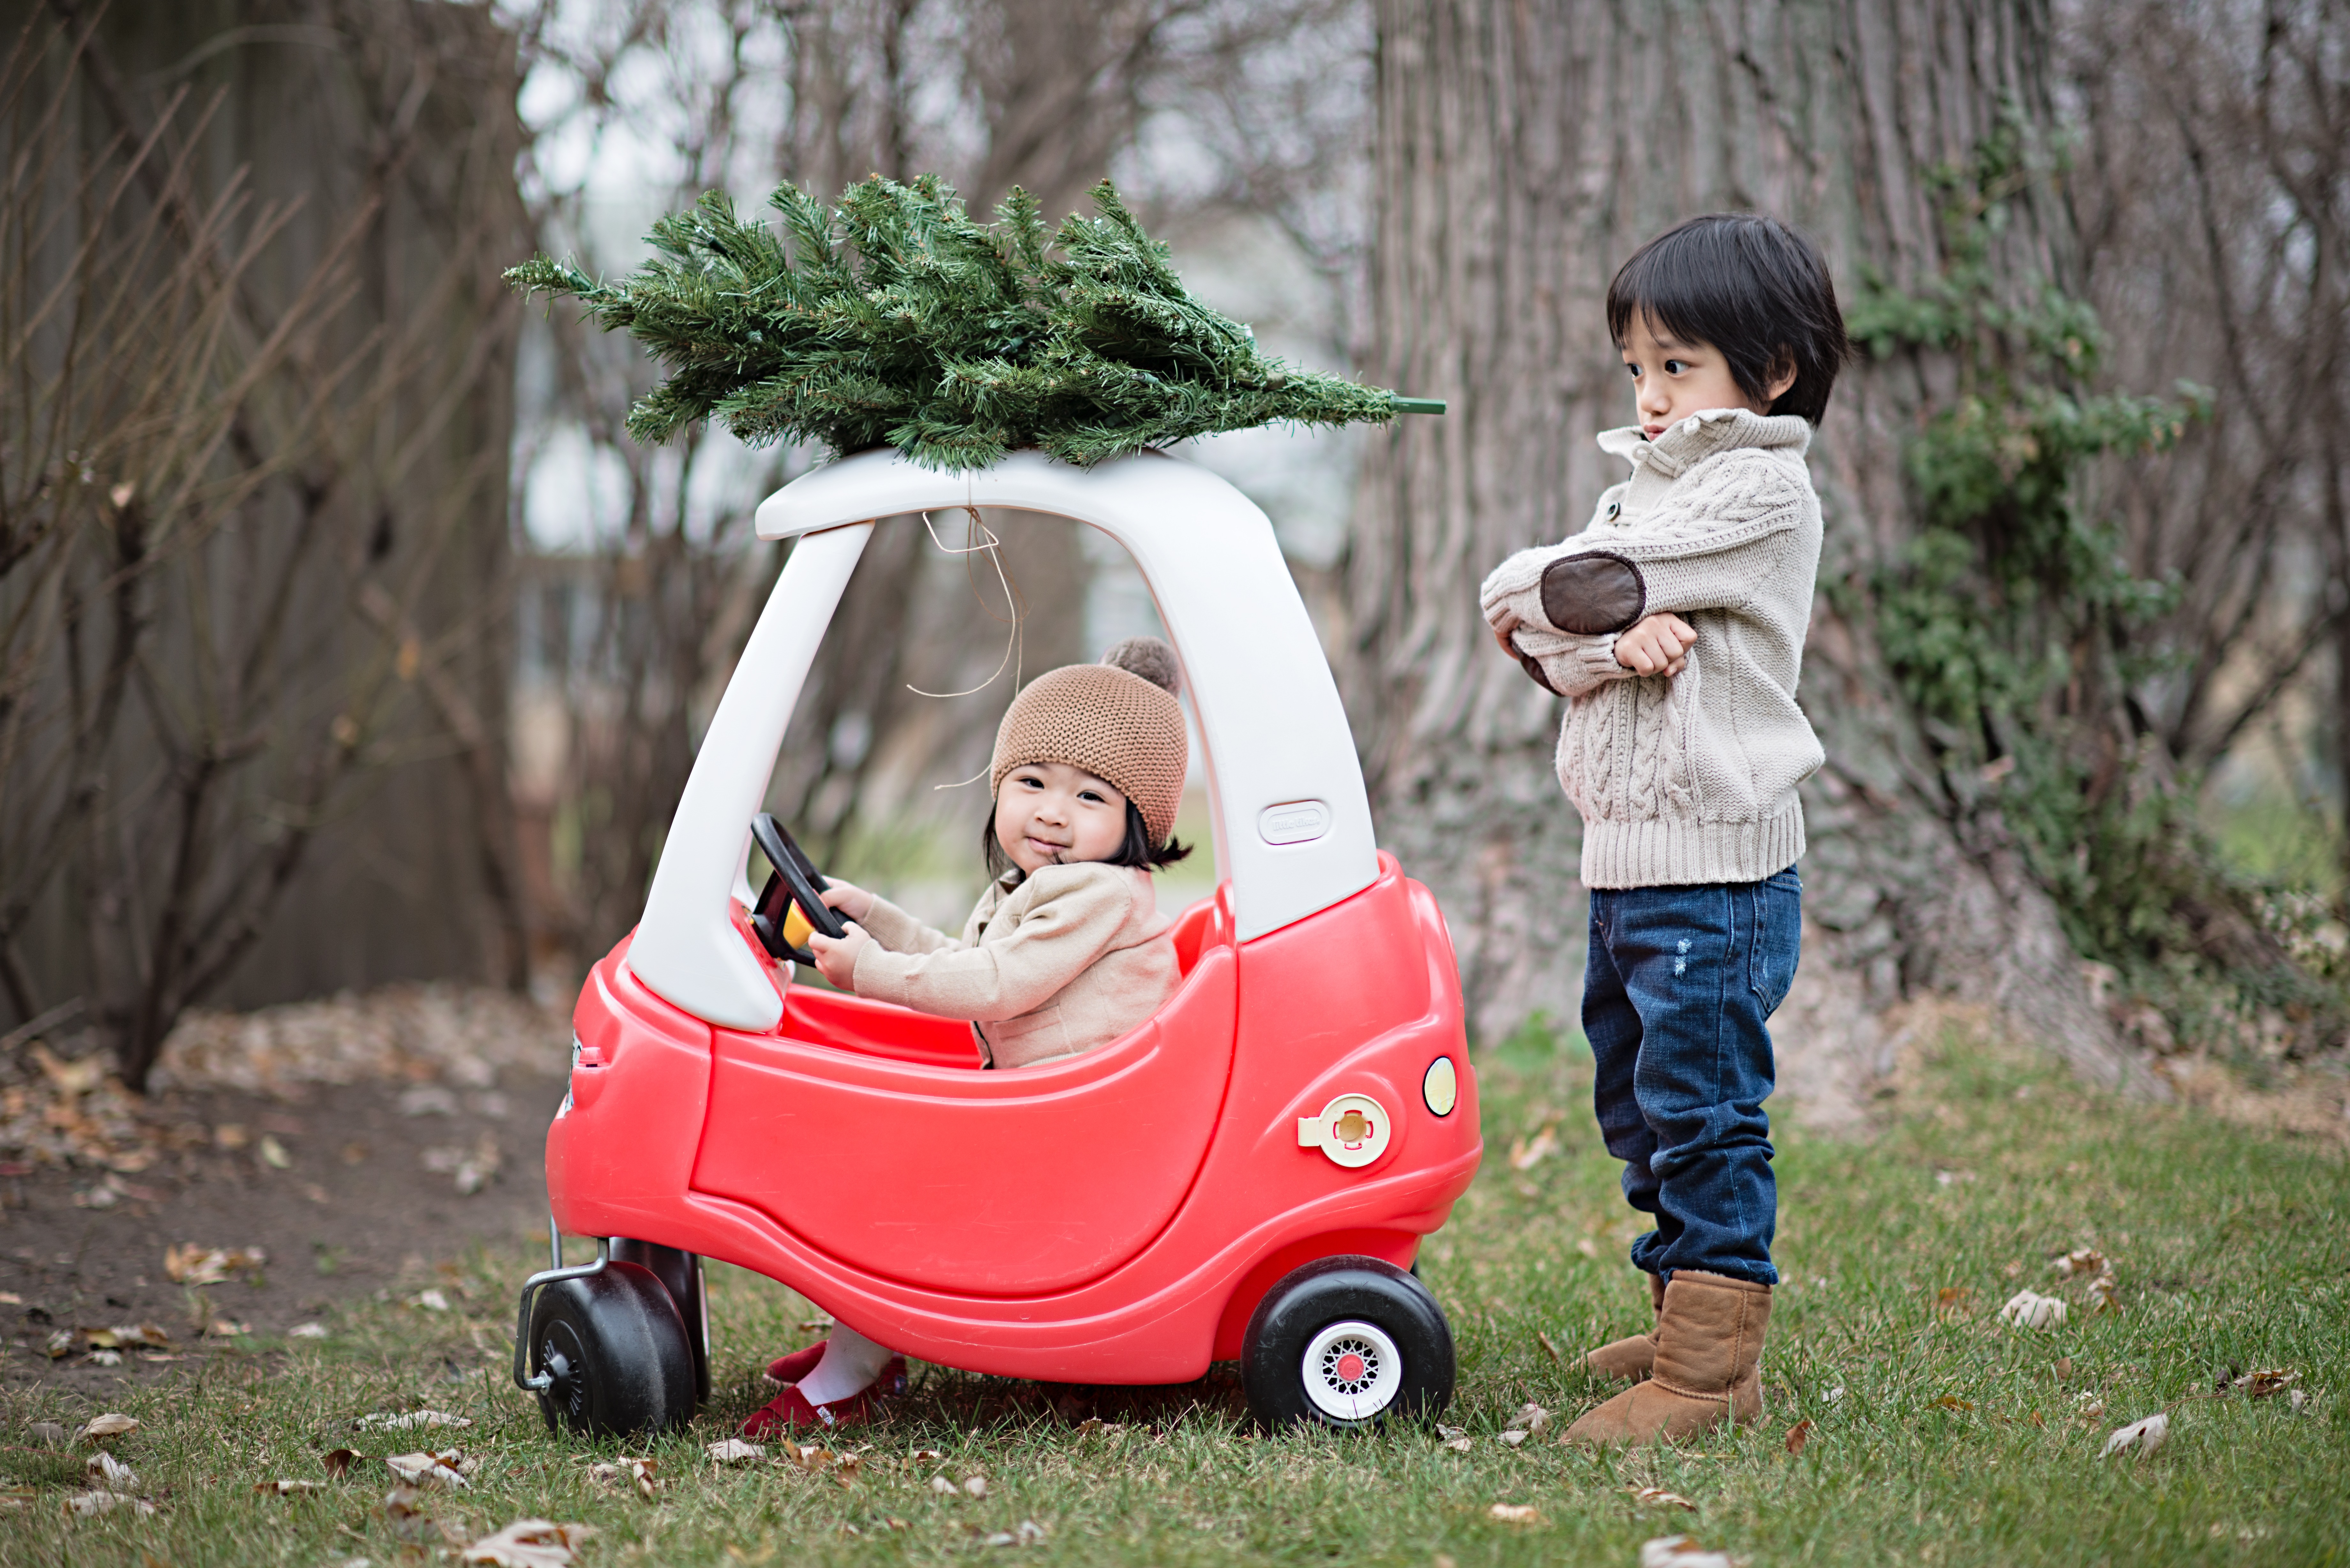 cute kids christmas picture ideas